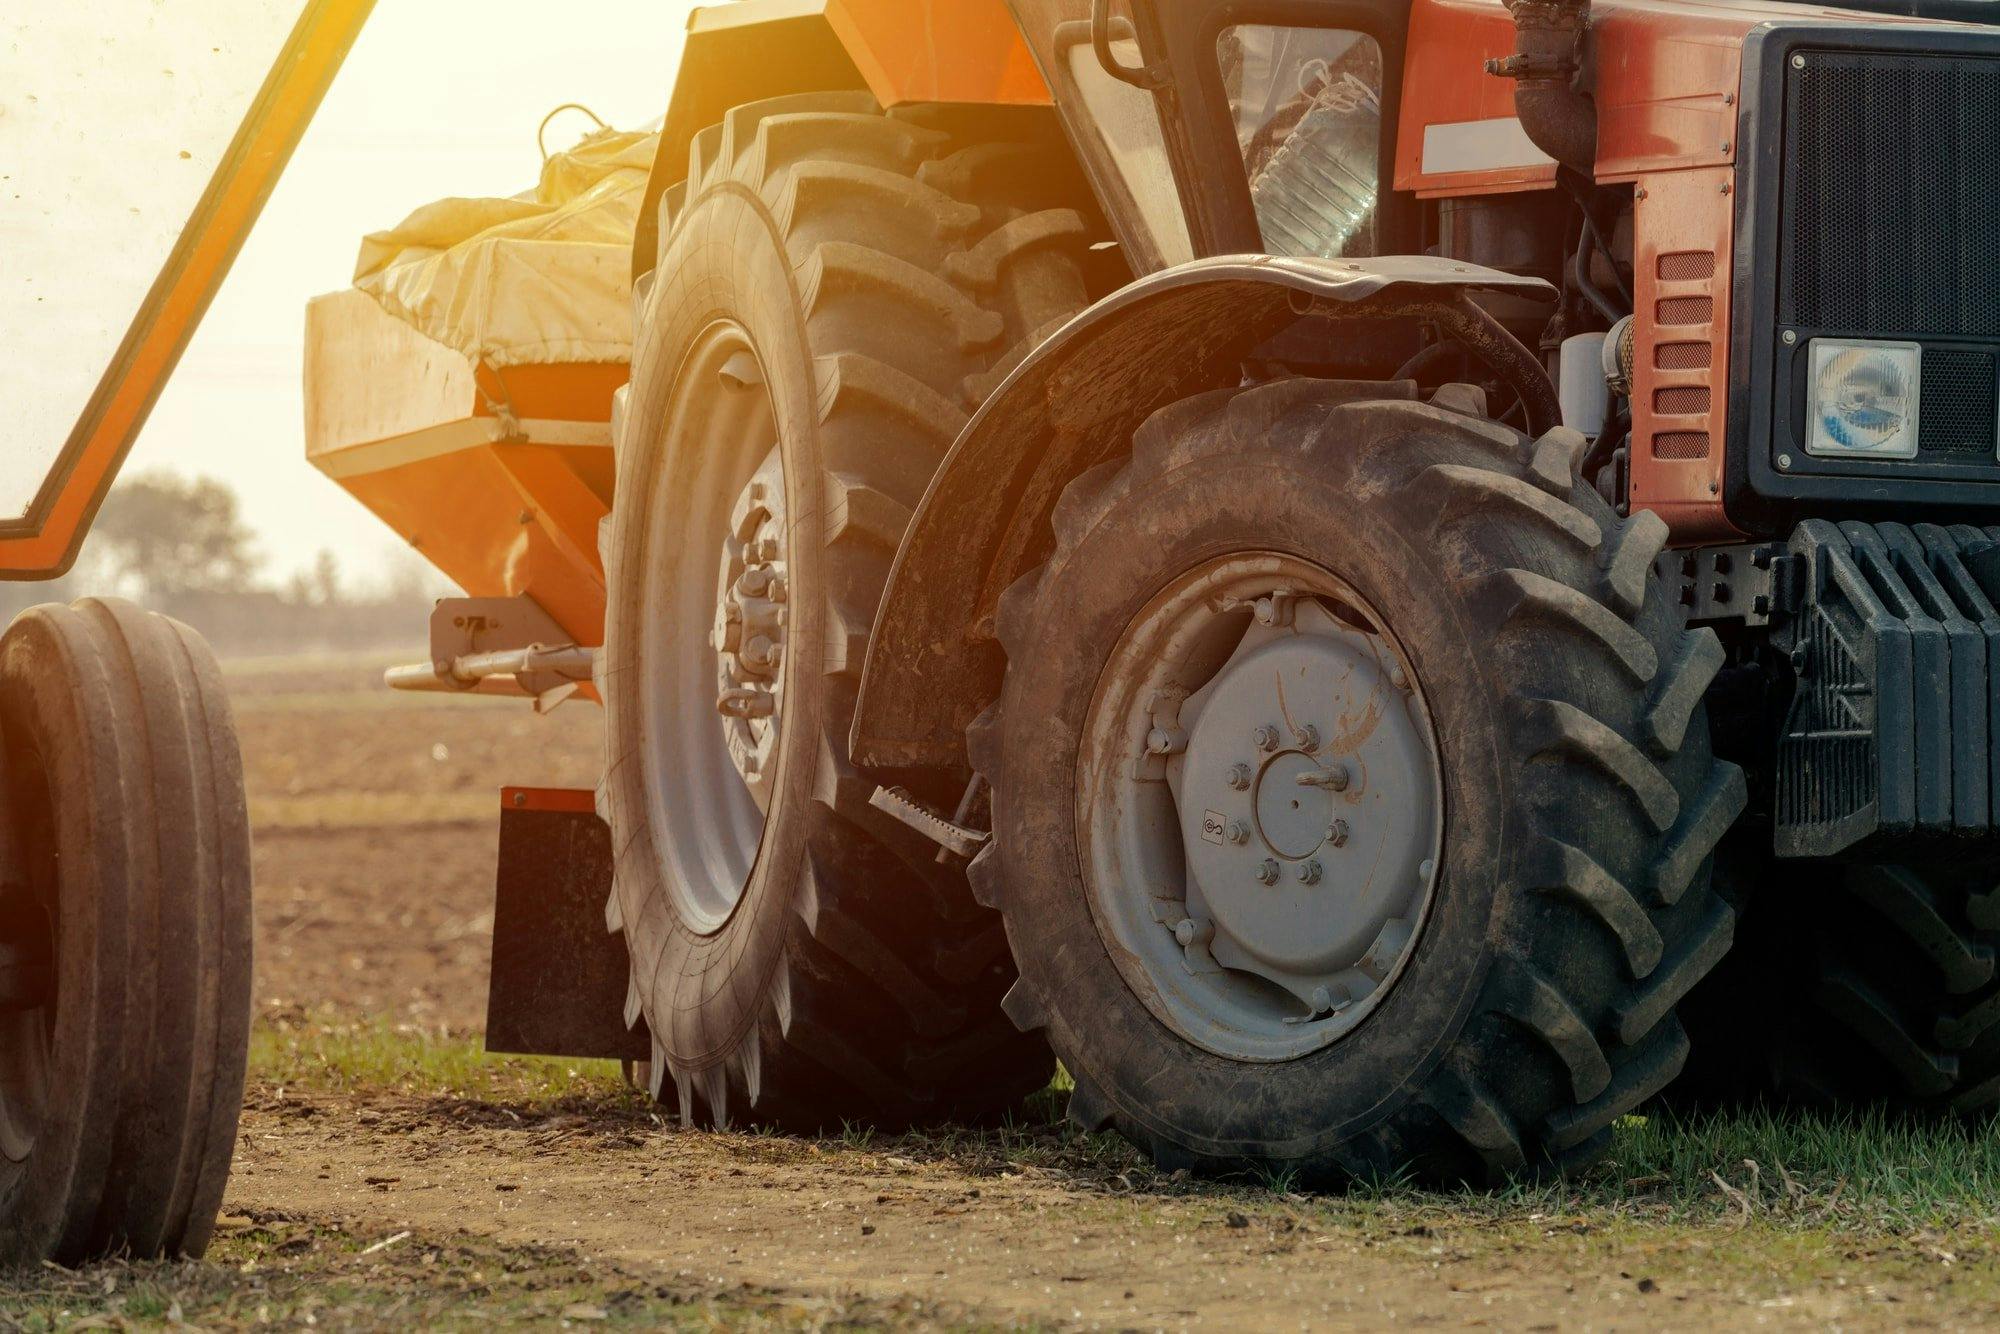 TOP 5 mistakes that farmers make when buying tractor GPS systems. Let’s learn from them.